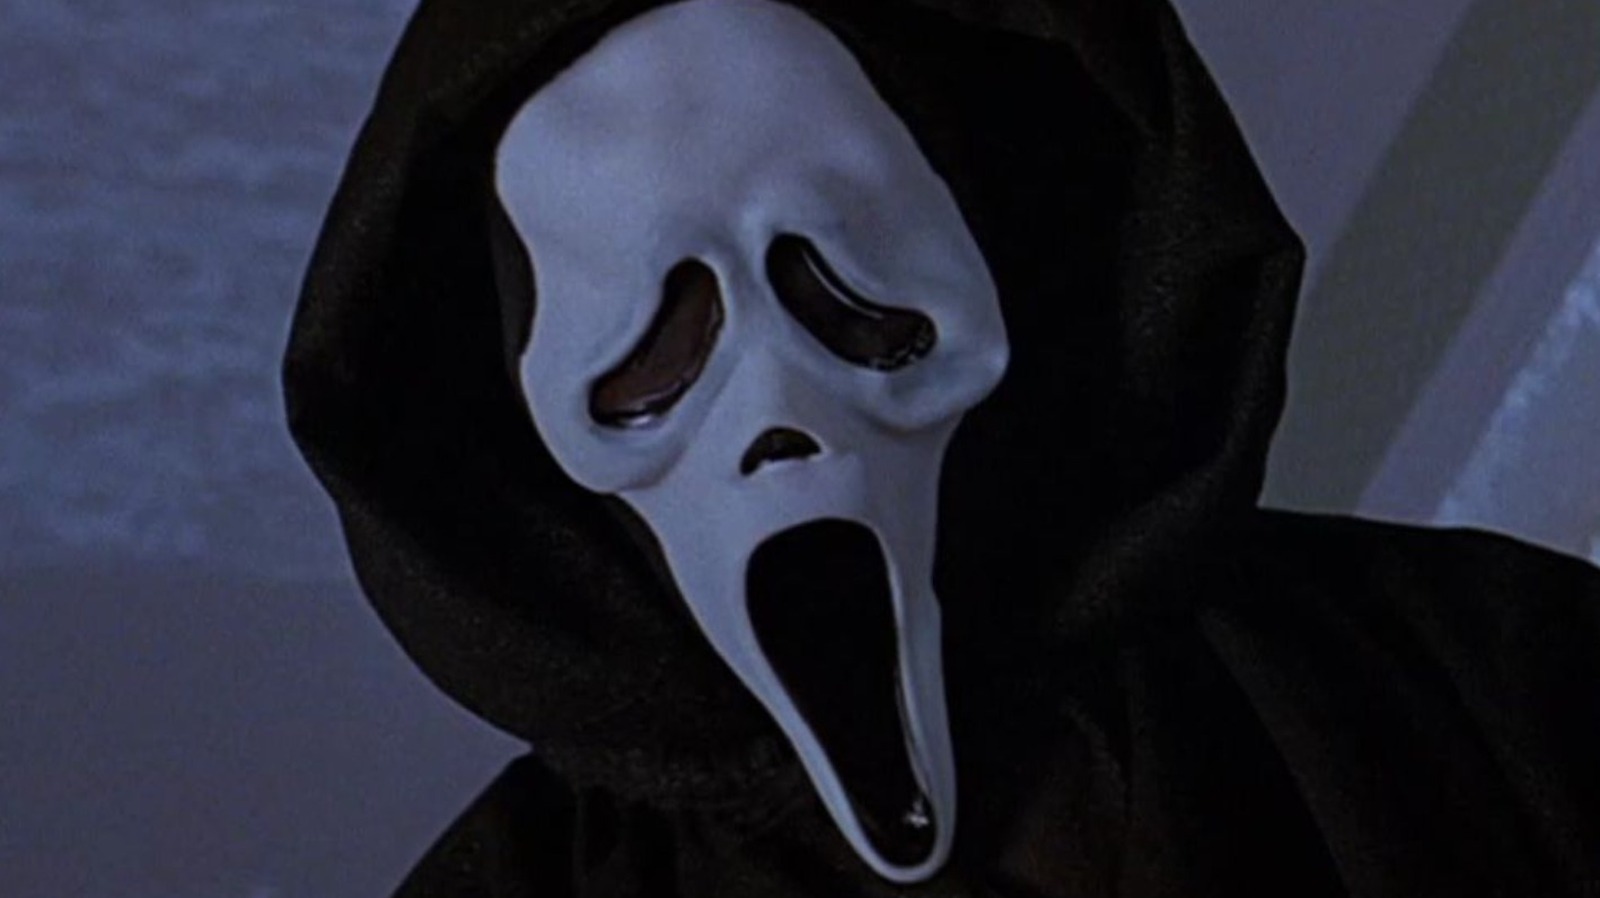 Why Scream 3 Has The Only Rotten Score In The Whole Franchise